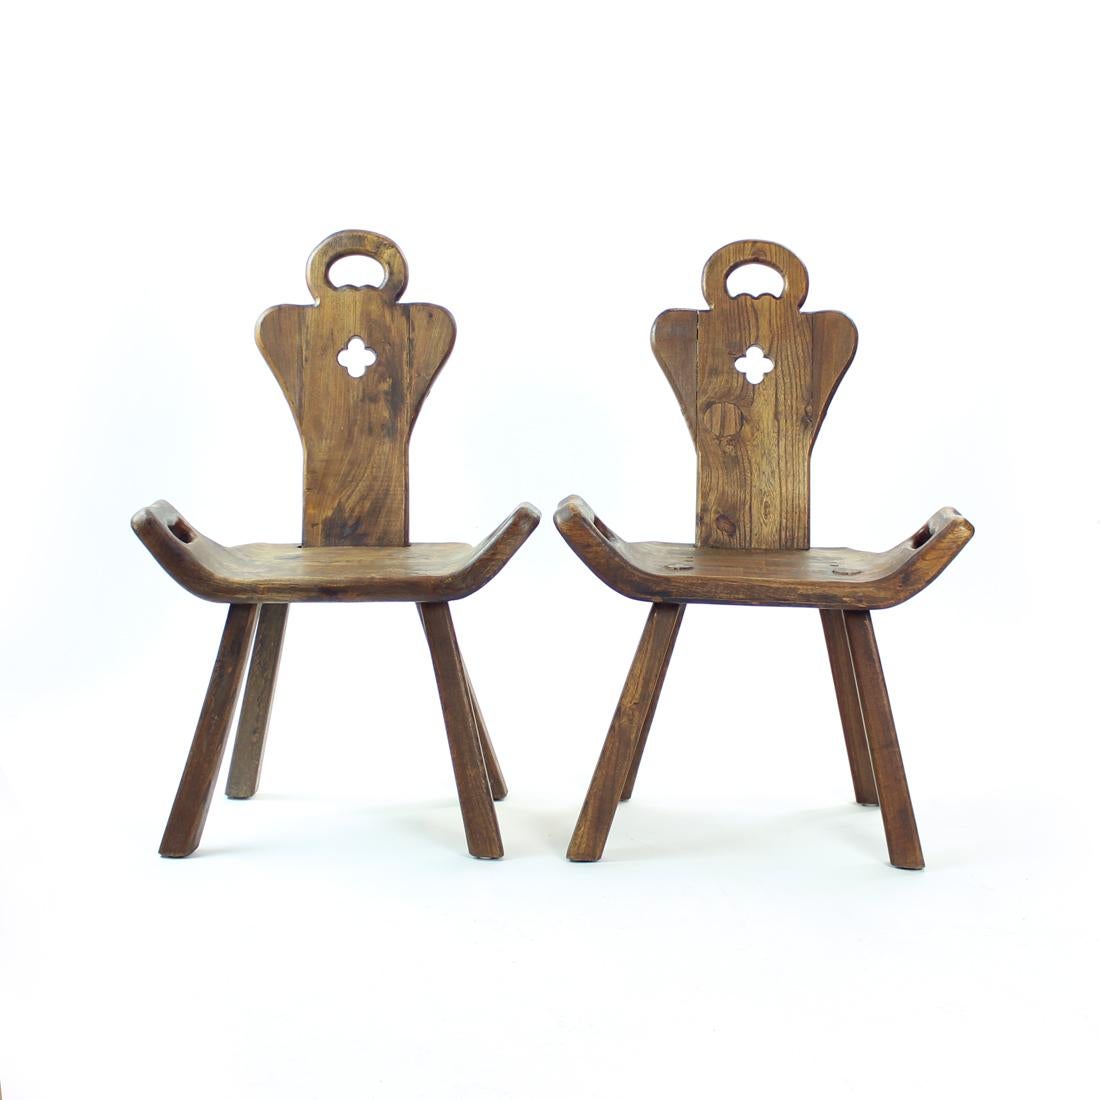 Wooden Handmade Occassional Chair, Holland 1920s For Sale 5